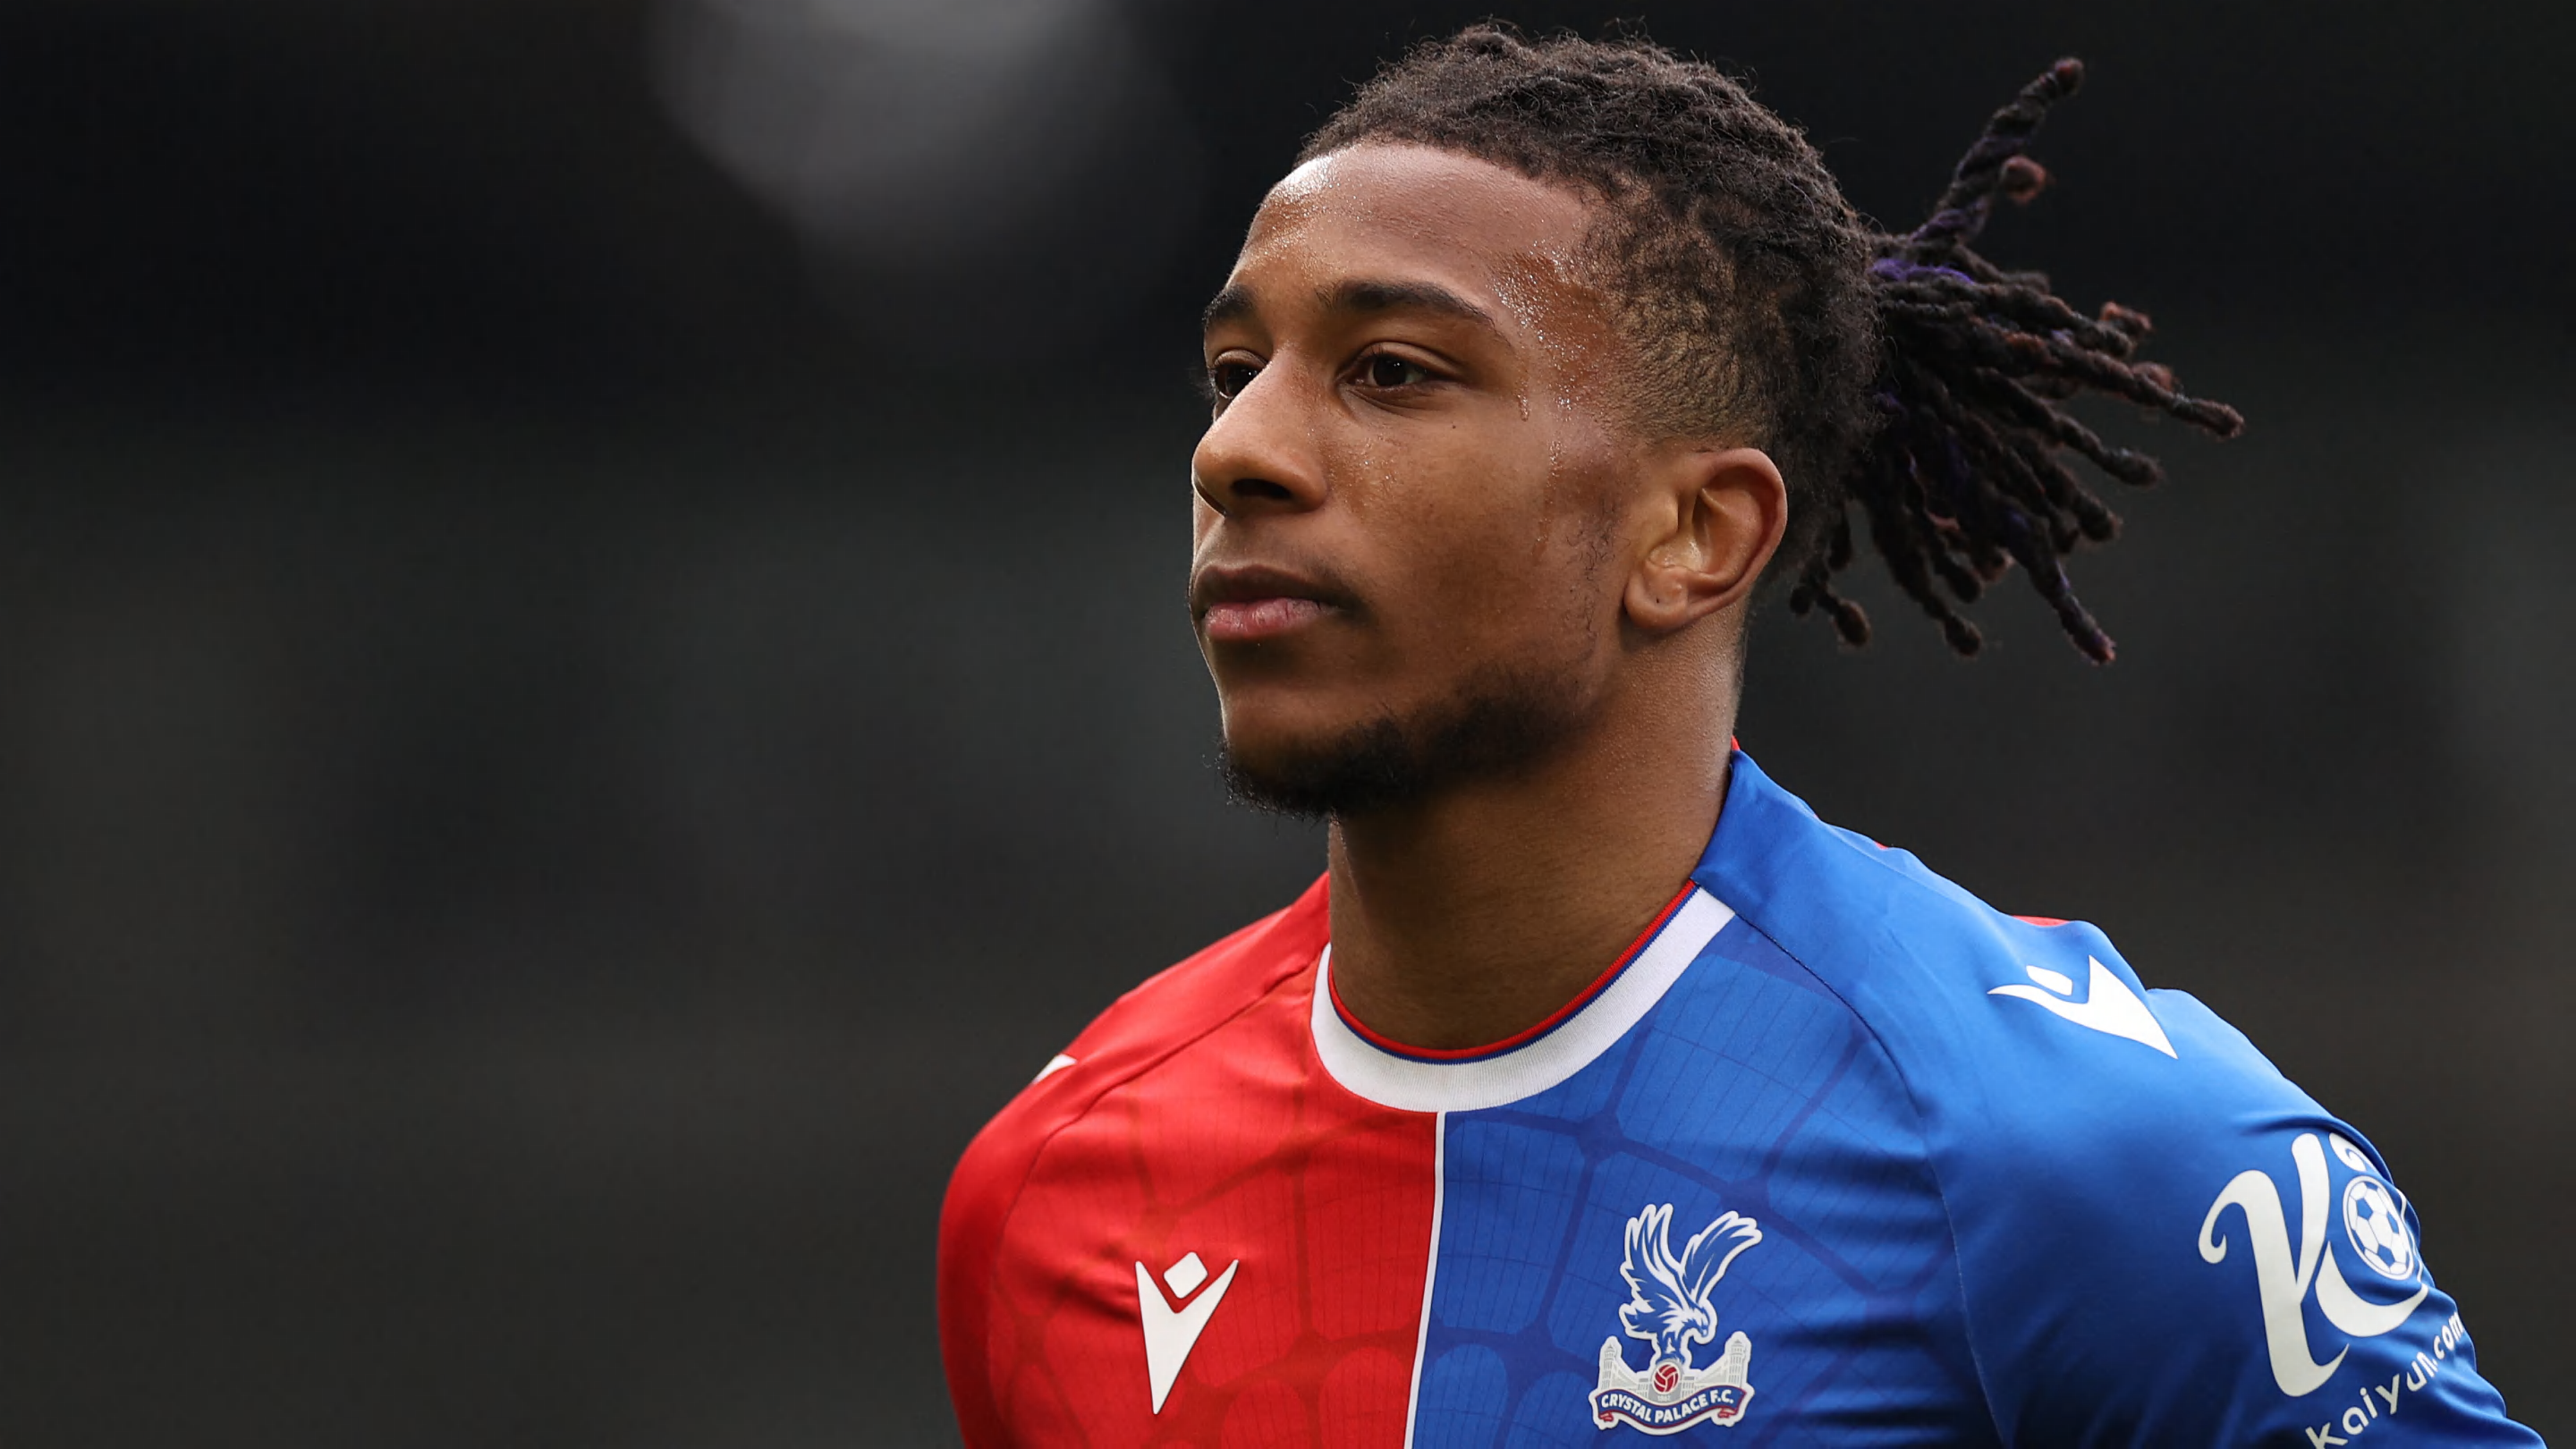 Crystal Palace make move to stop Michael Olise joining Chelsea - report